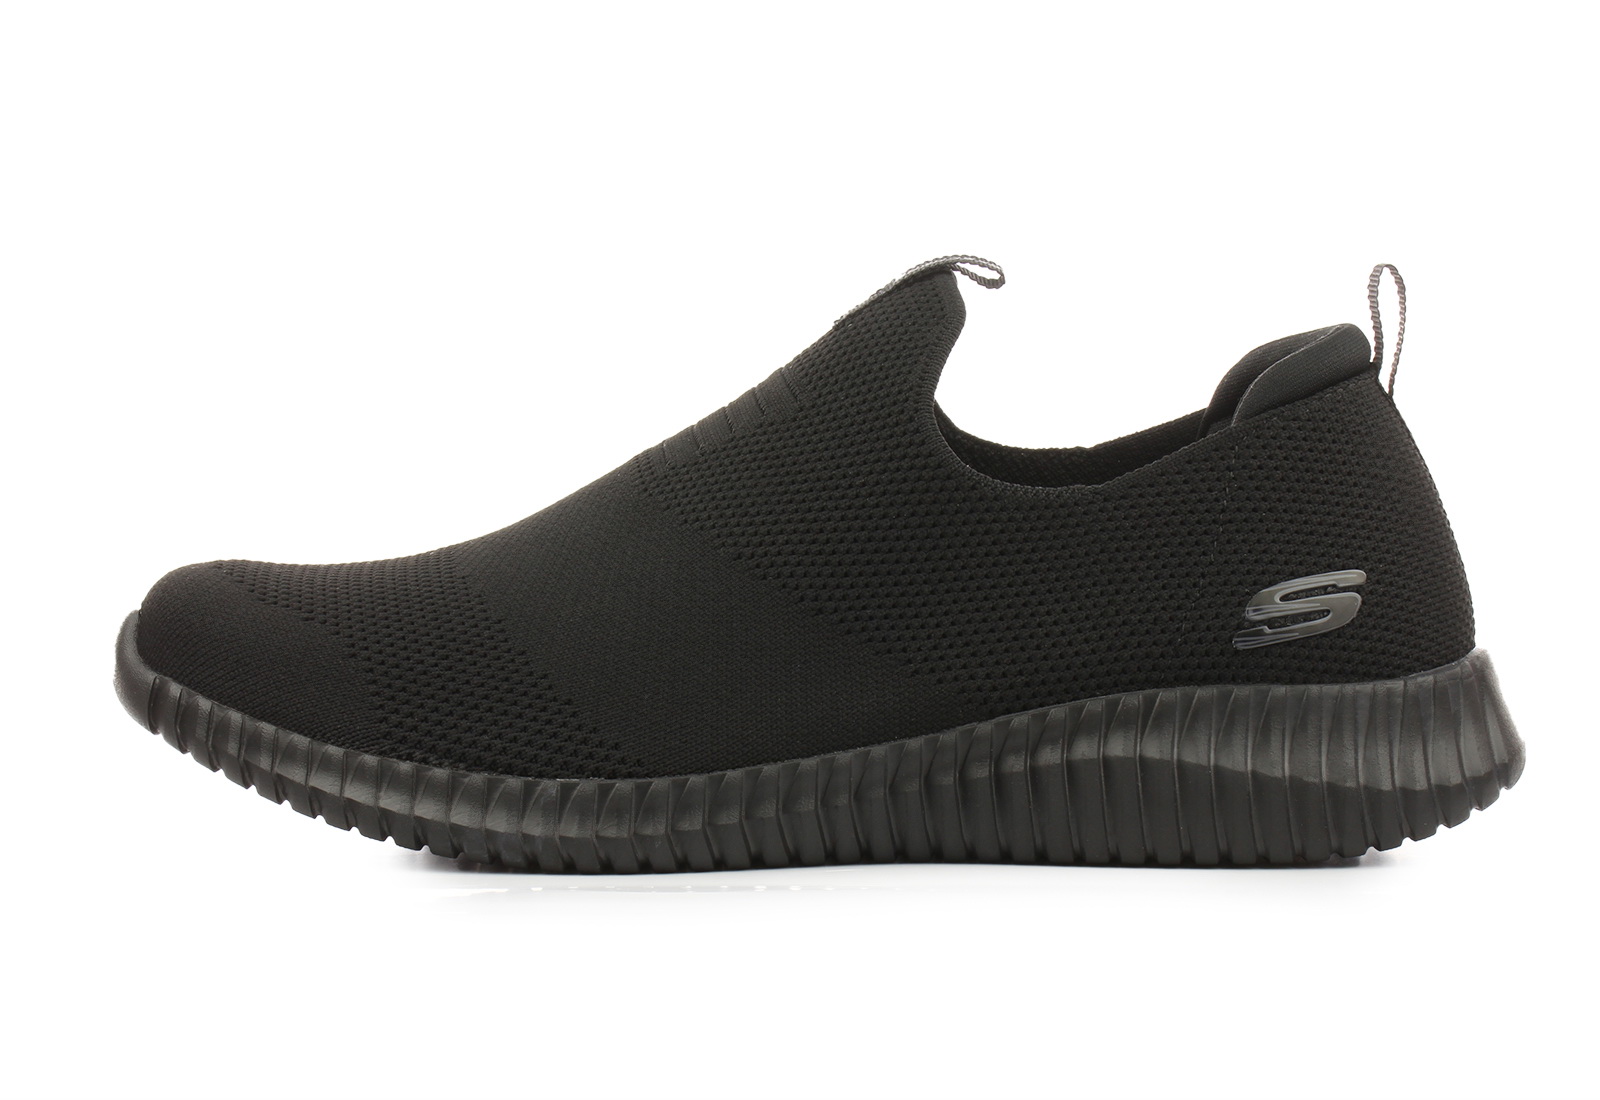 Slip-ons Elite Flex- - 52649-bbk - shop for sneakers, shoes and boots